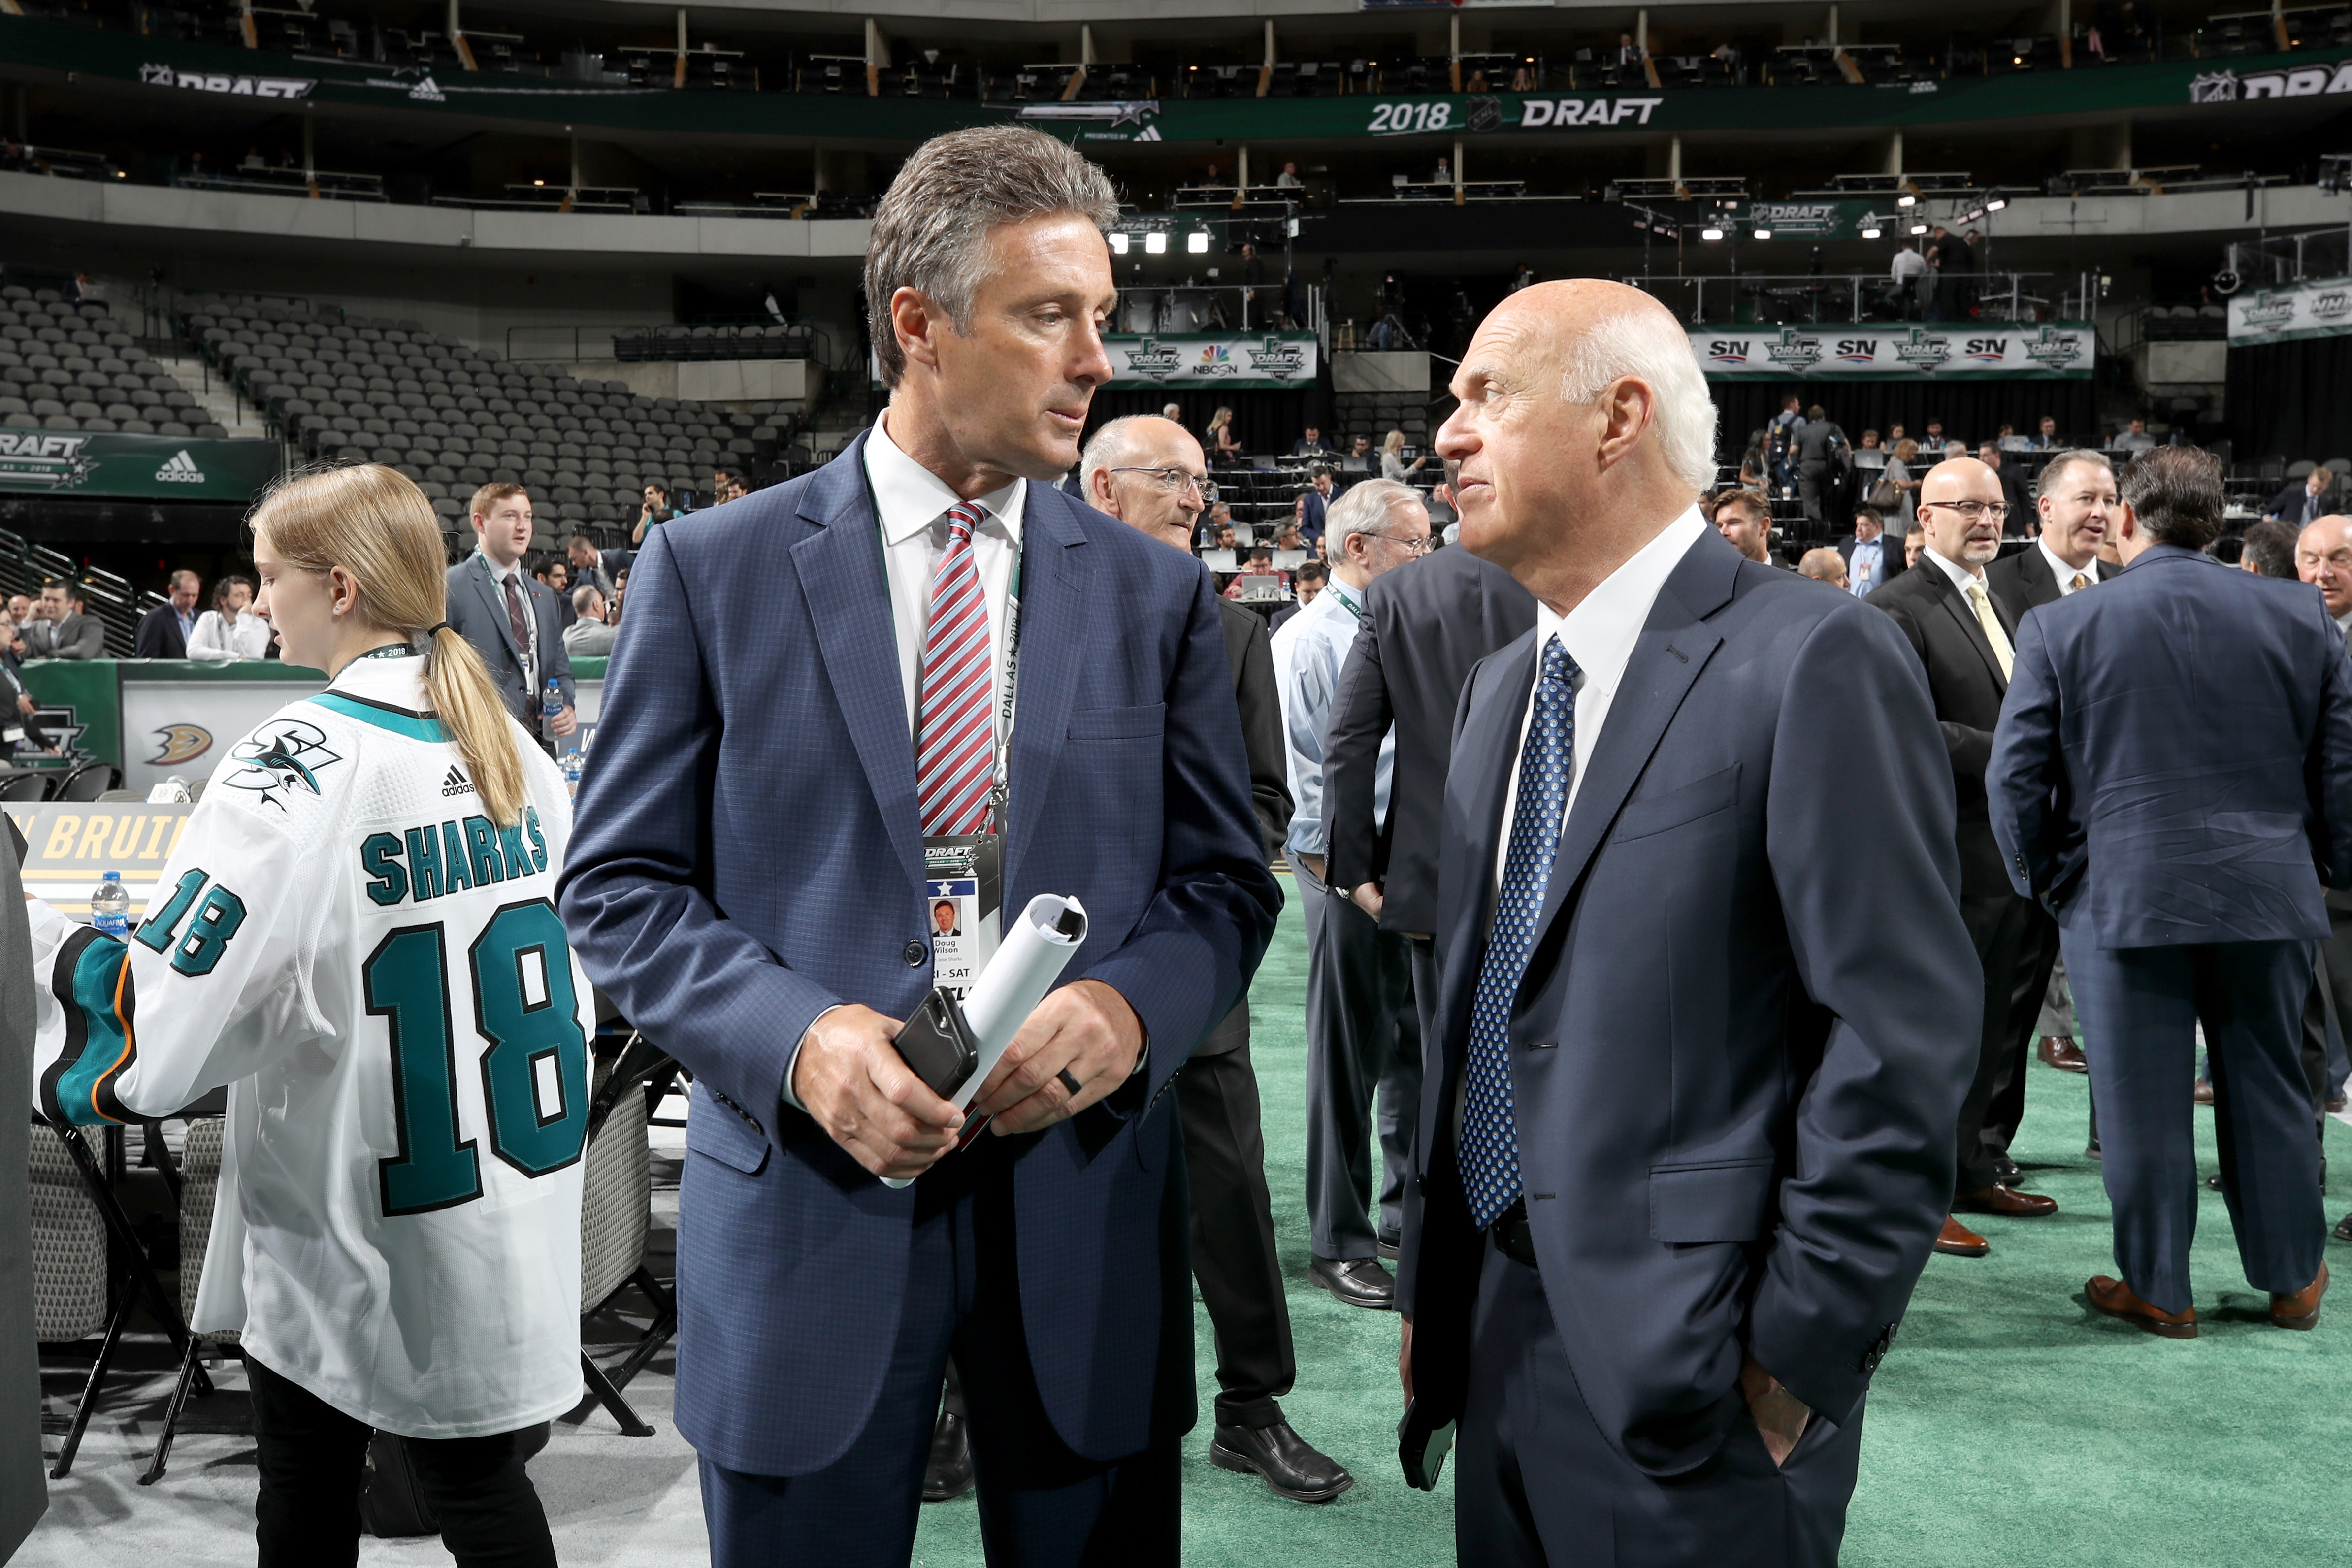 DALLAS, TX - JUNE 22: (l-r) Doug Wilson of the San Jose Sharks and Lou Lamoriello of the New York Islanders chat prior to the first round of the 2018 NHL Draft at American Airlines Center on June 22, 2018 in Dallas, Texas.